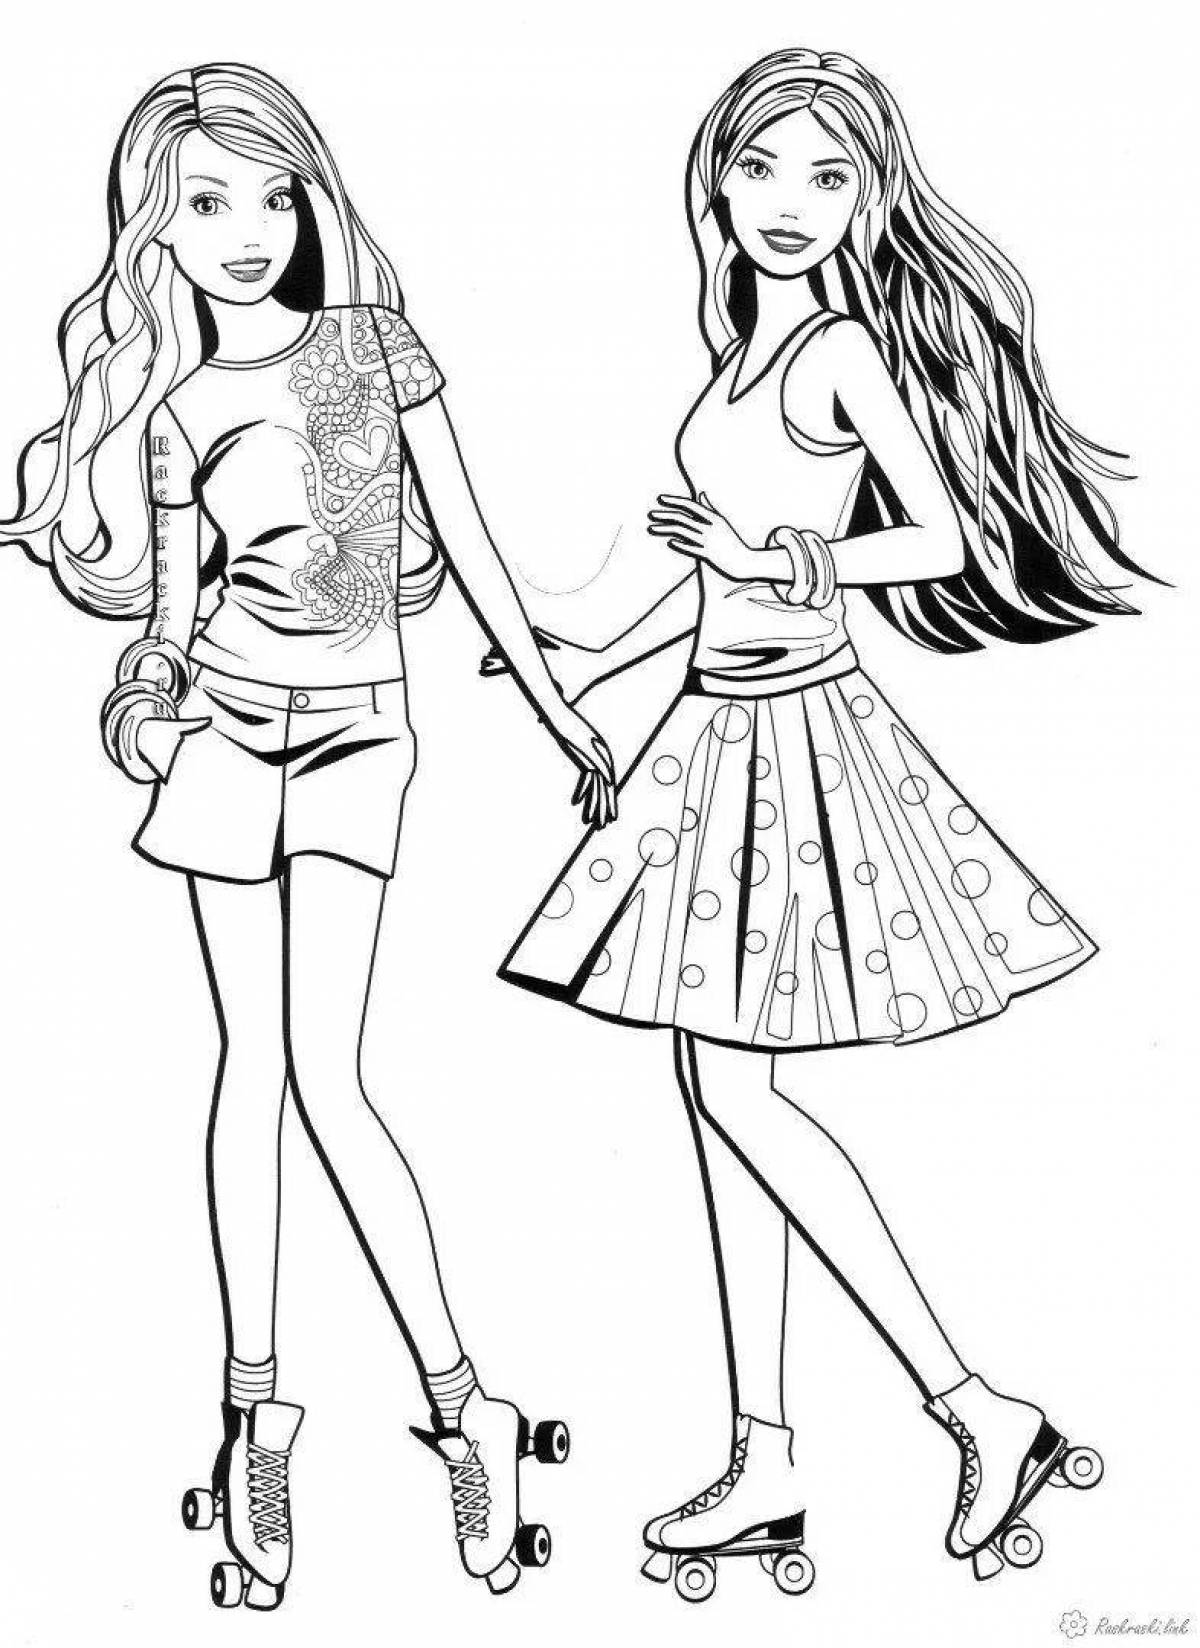 Coloring pages of modern fashionistas